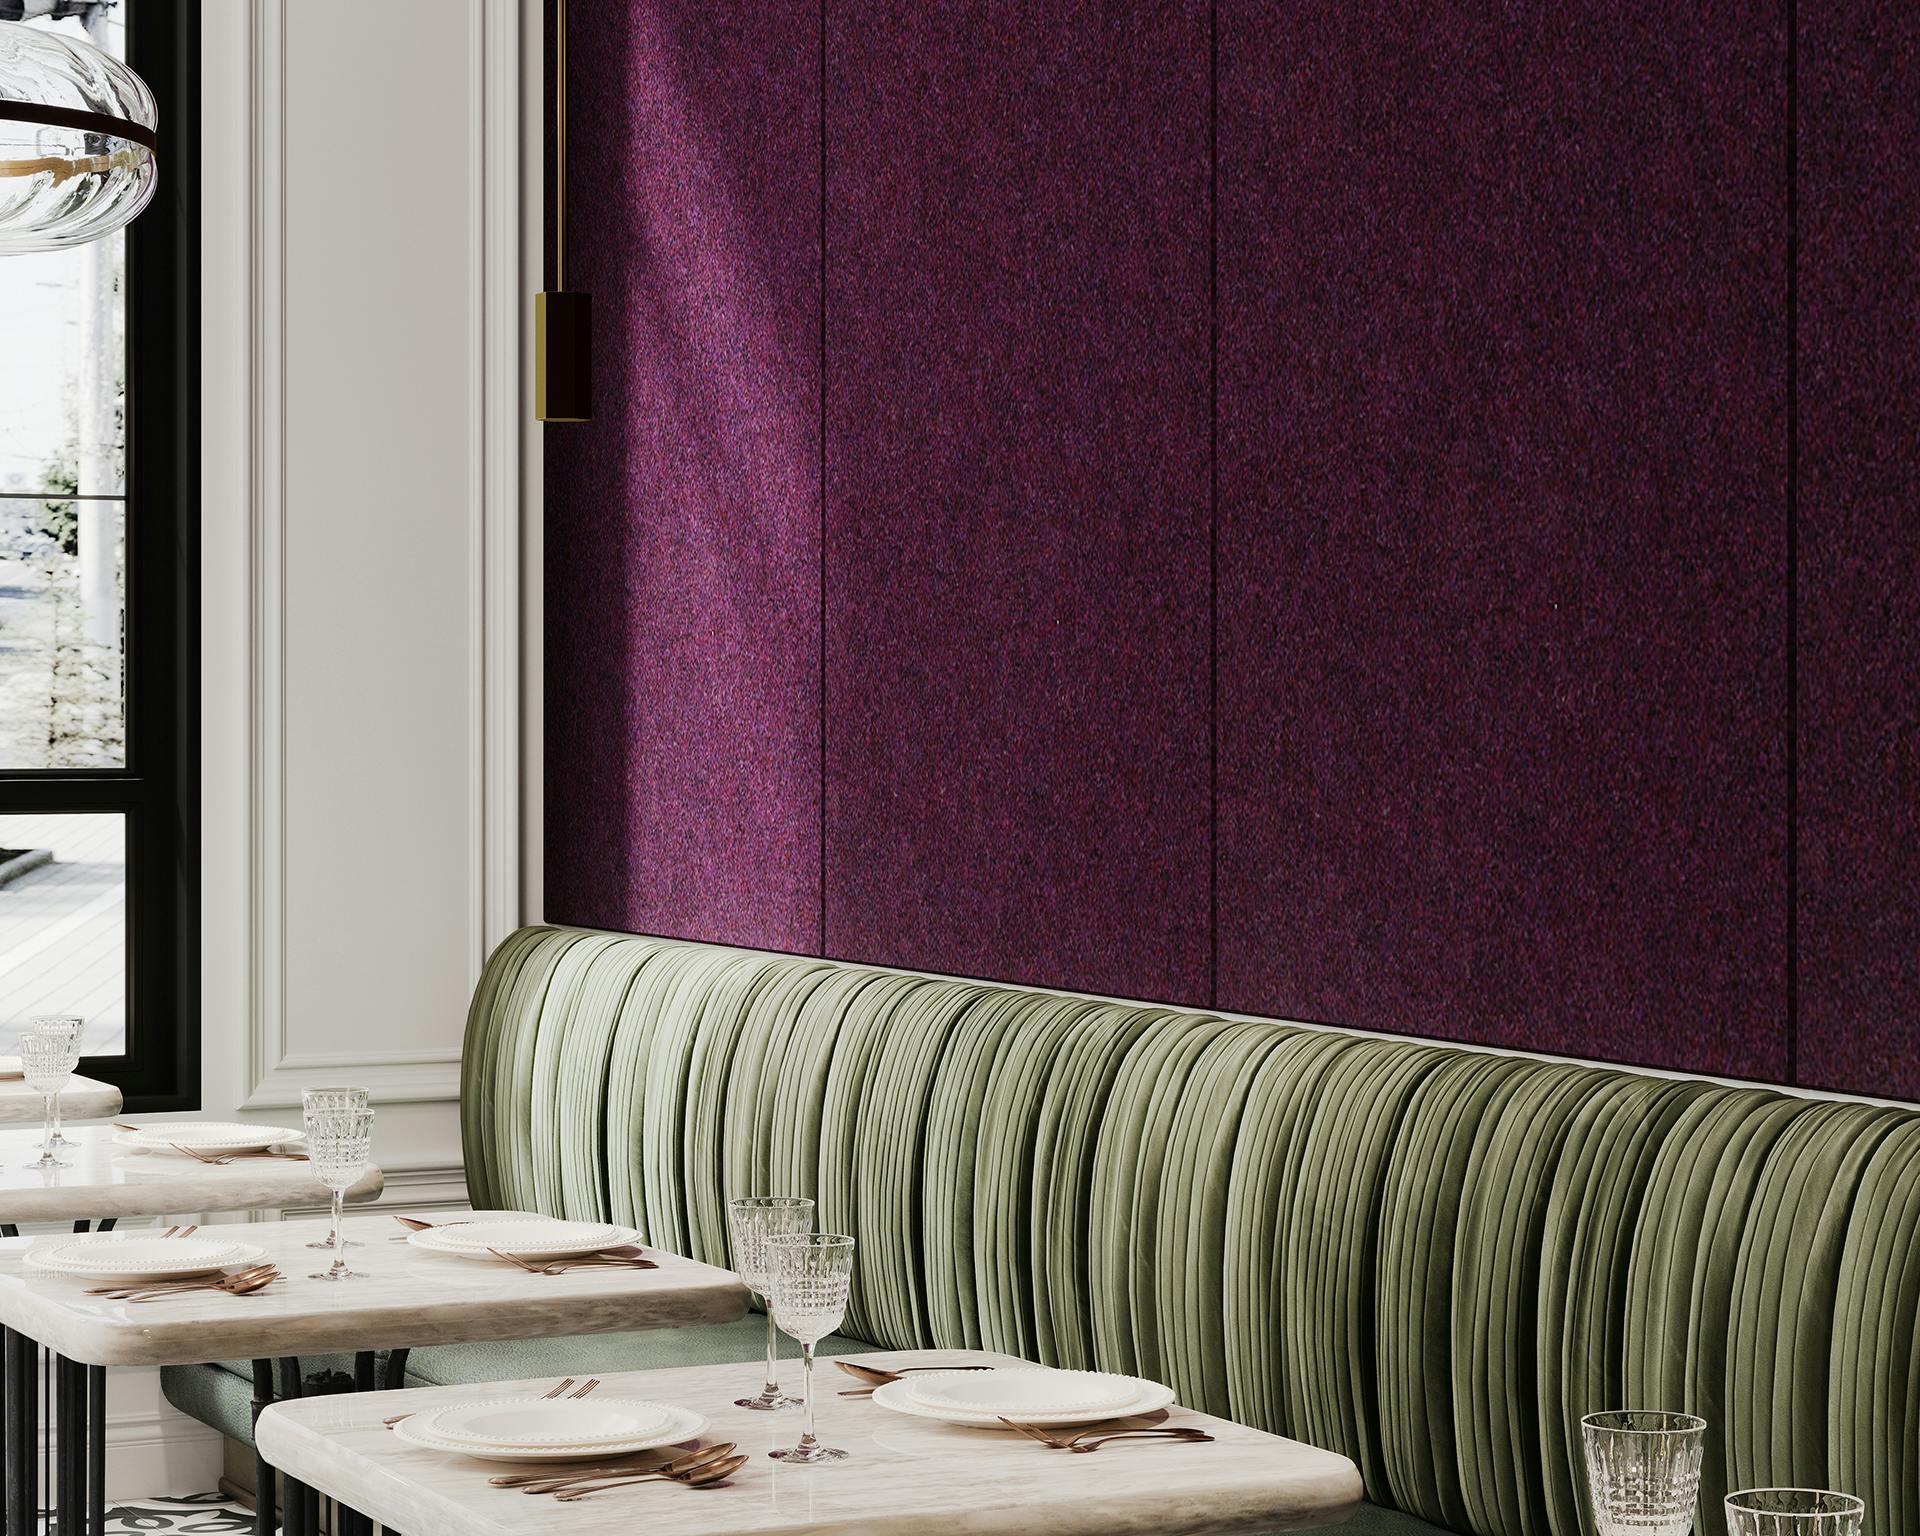 A chic dining area with green upholstered bench seating along a wall covered in deep purple acoustic felt panels. The space features elegant, mirrored tables set with fine china and glassware, and large windows allowing natural light to filter in.